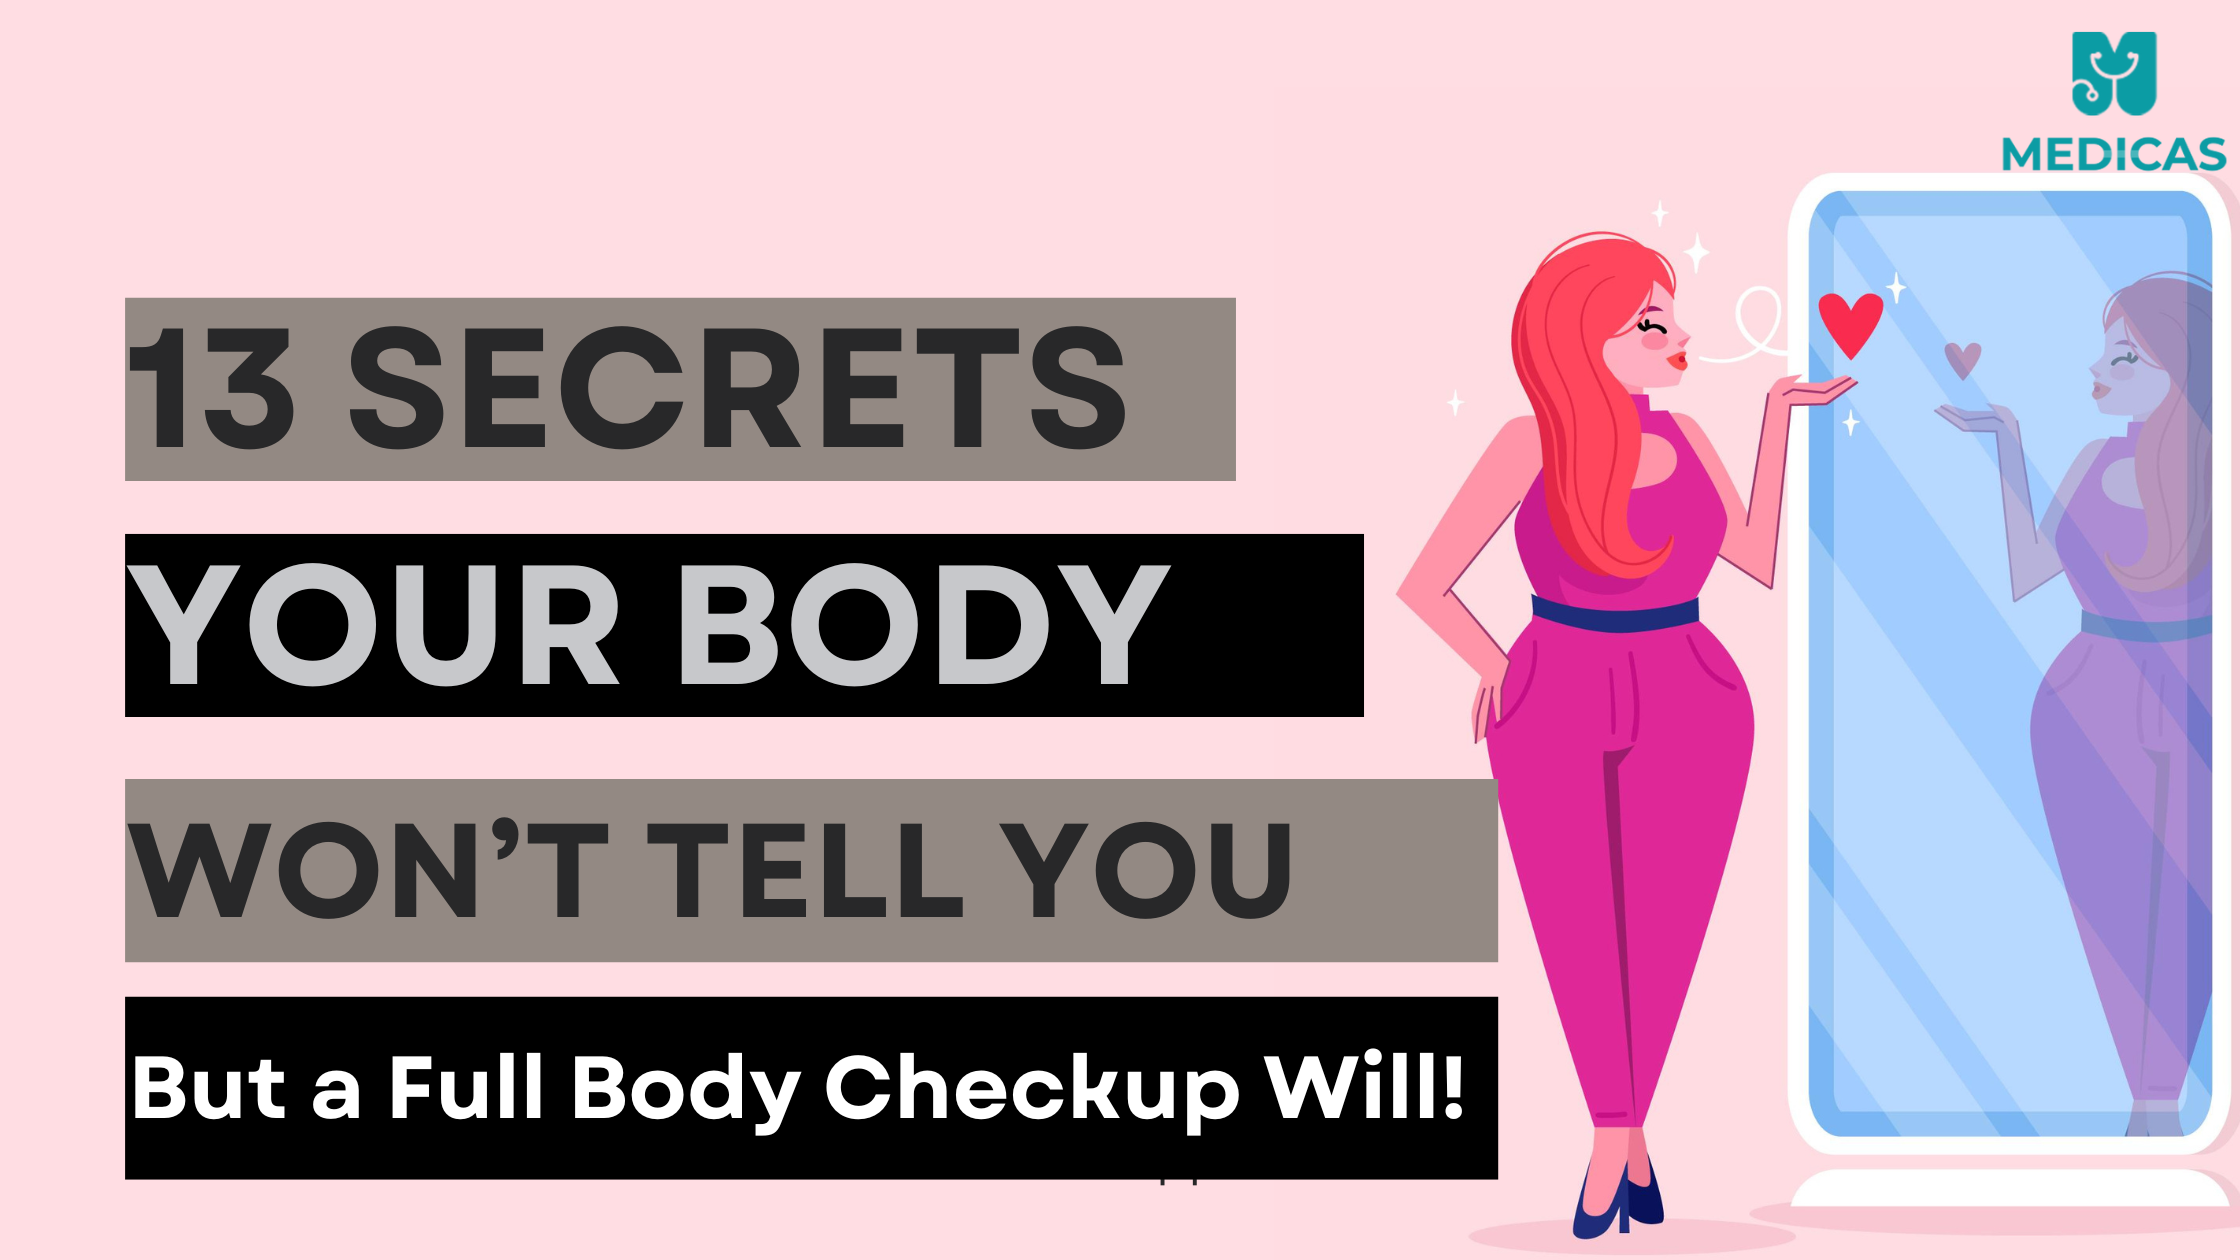 13 Secrets Your Body Won't Tell You (But a Full Body Checkup Will!)